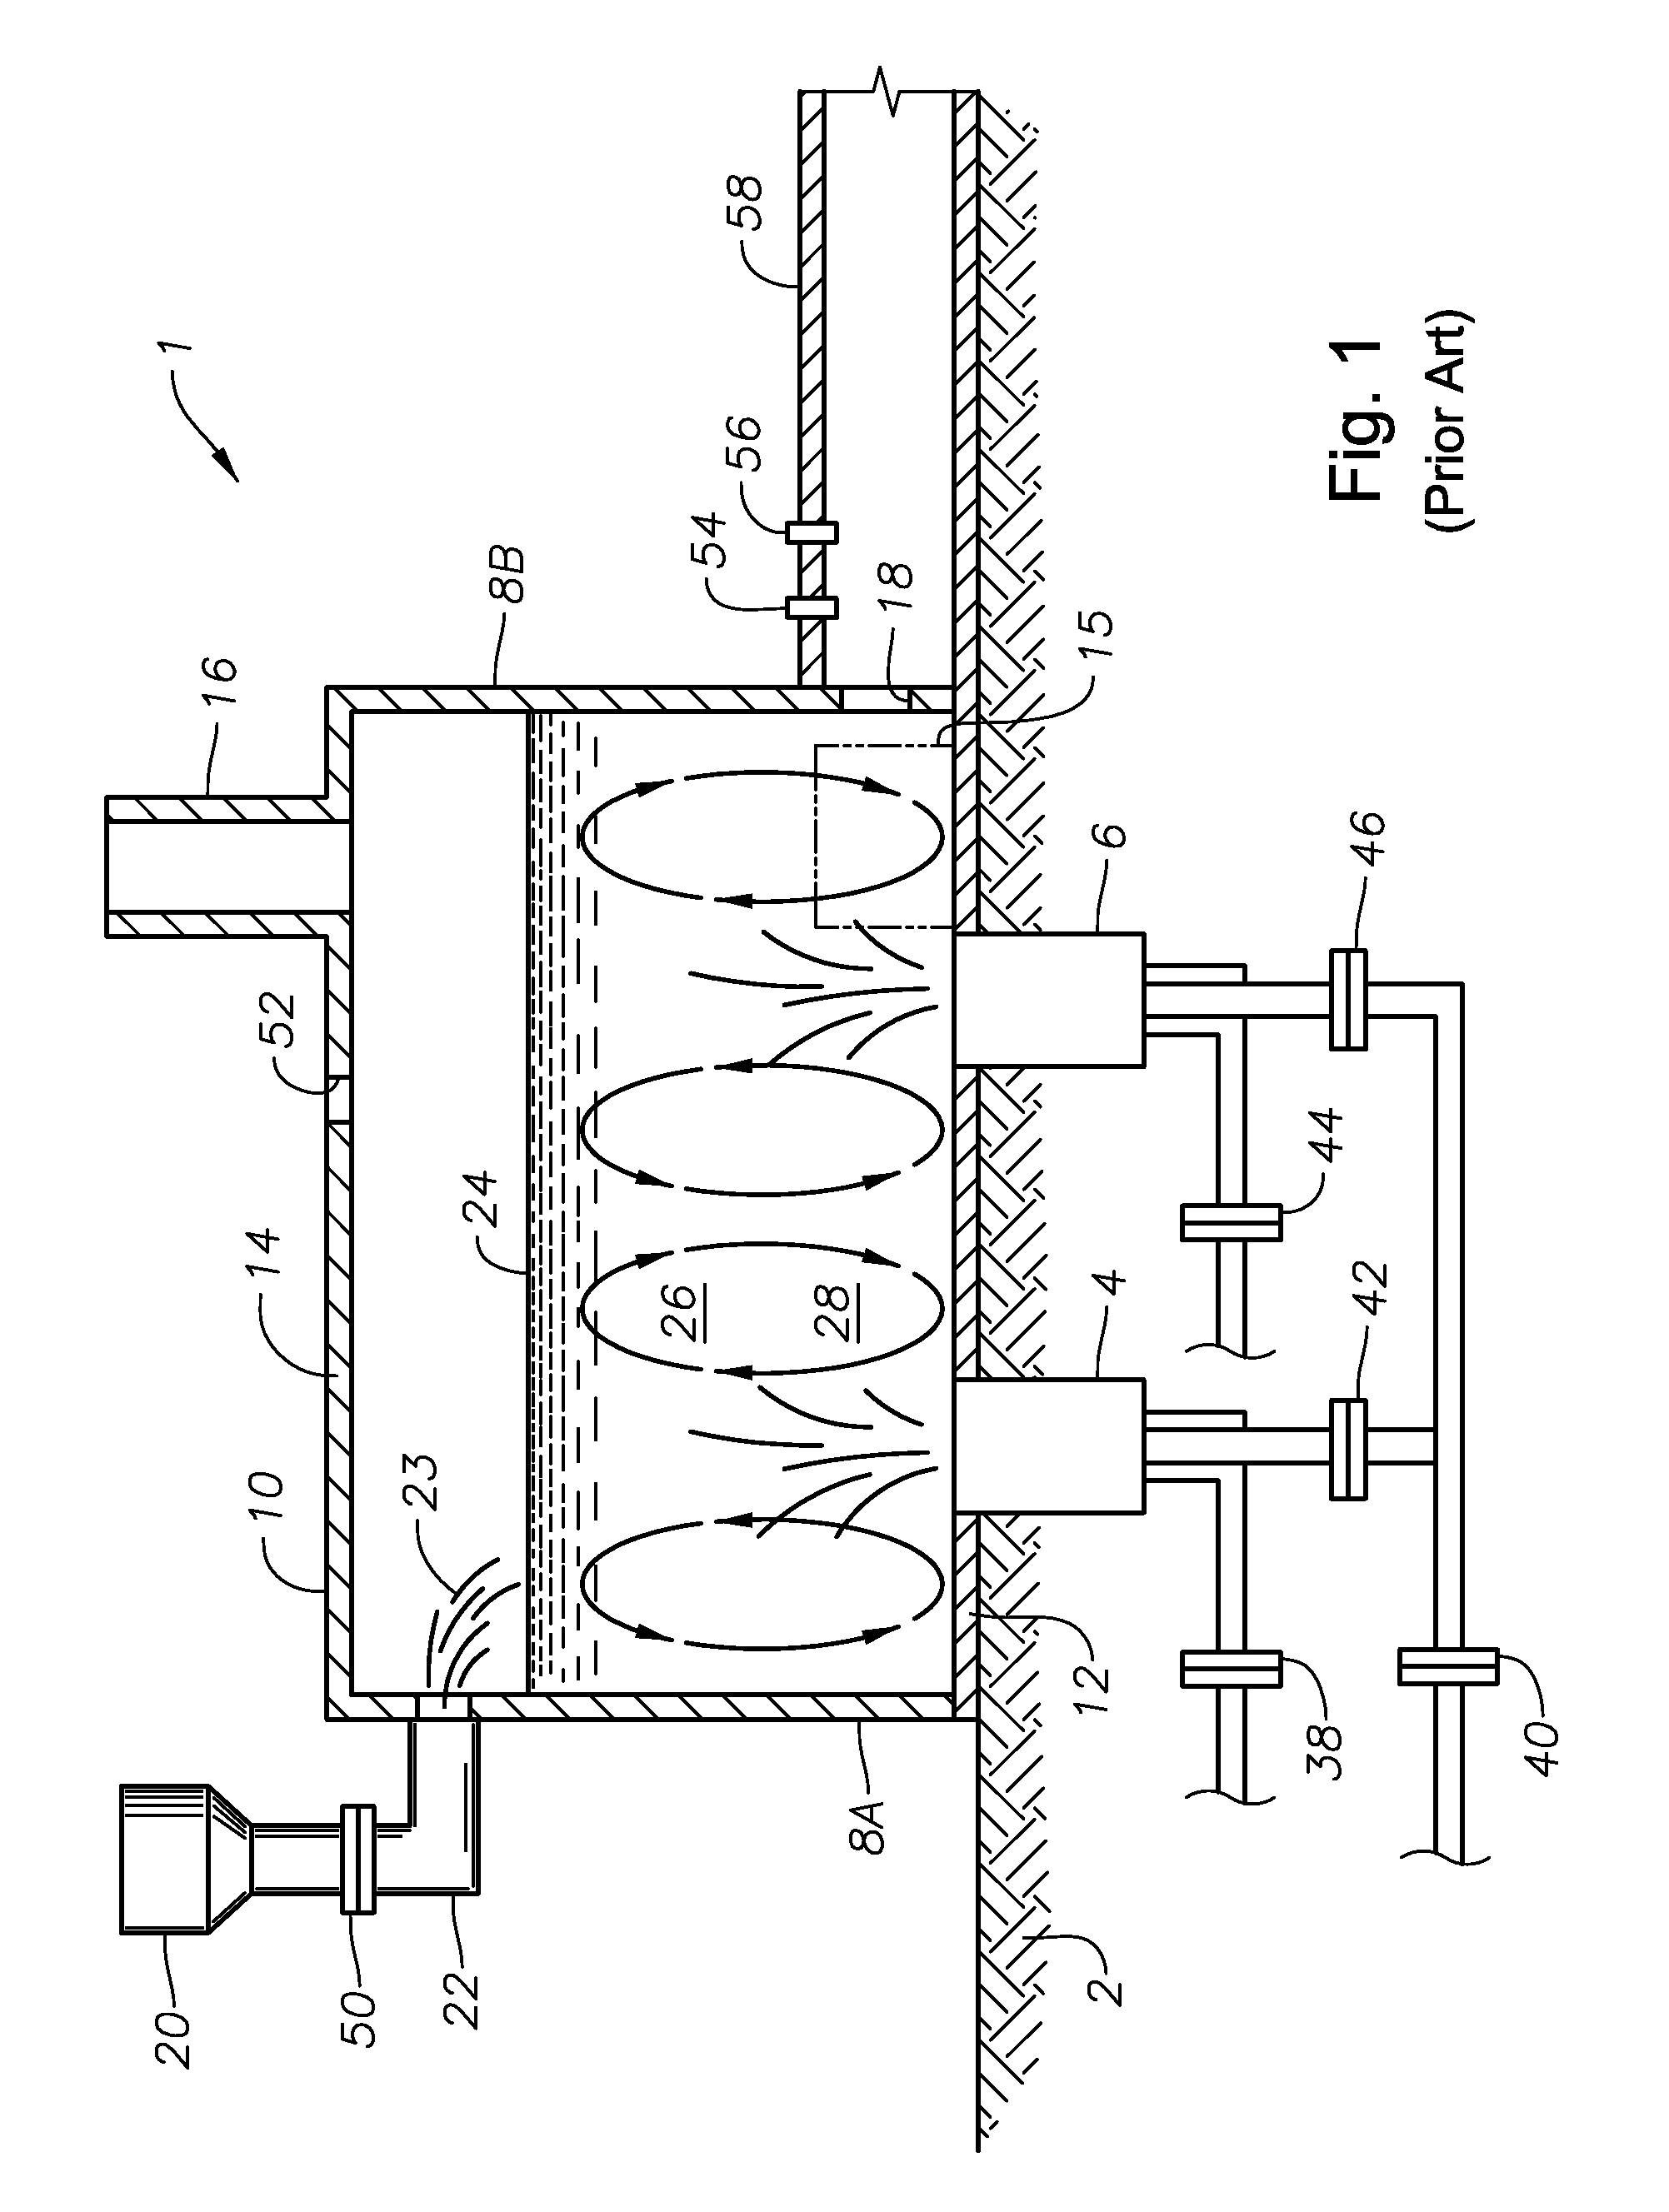 Submerged combustion glass manufacturing systems and methods